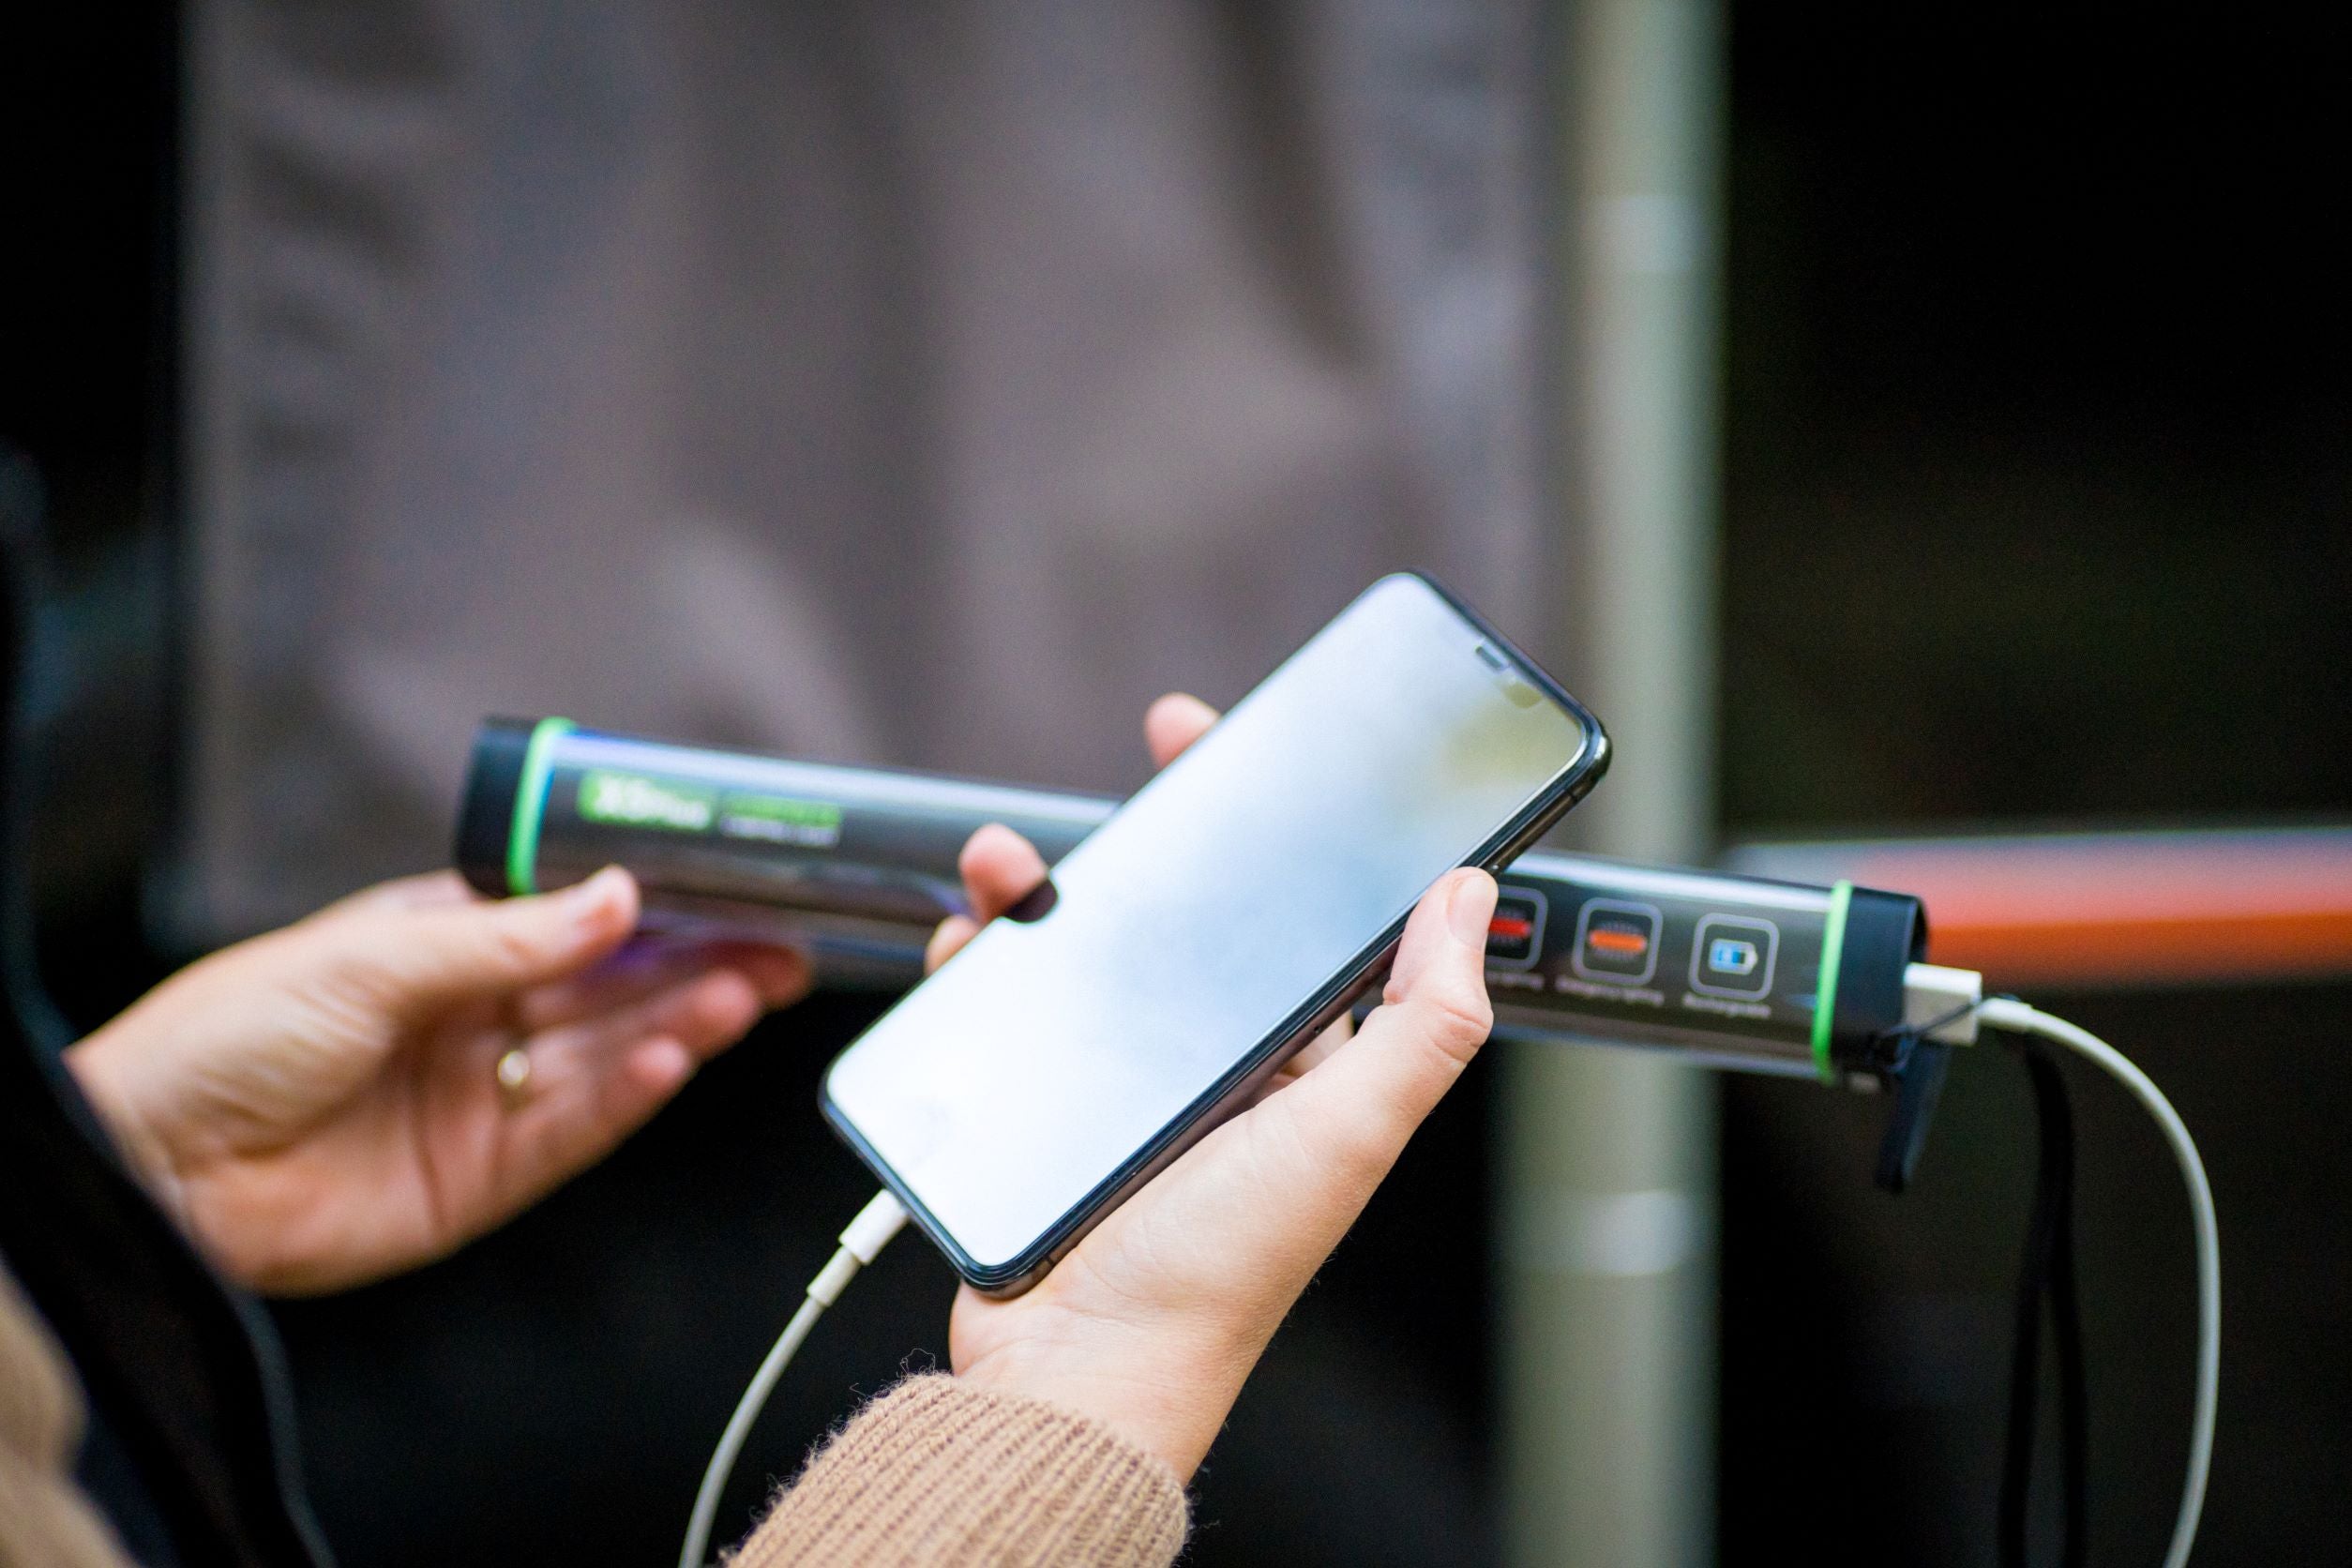 LED Power Bank Utility Torch Charging an iPhone